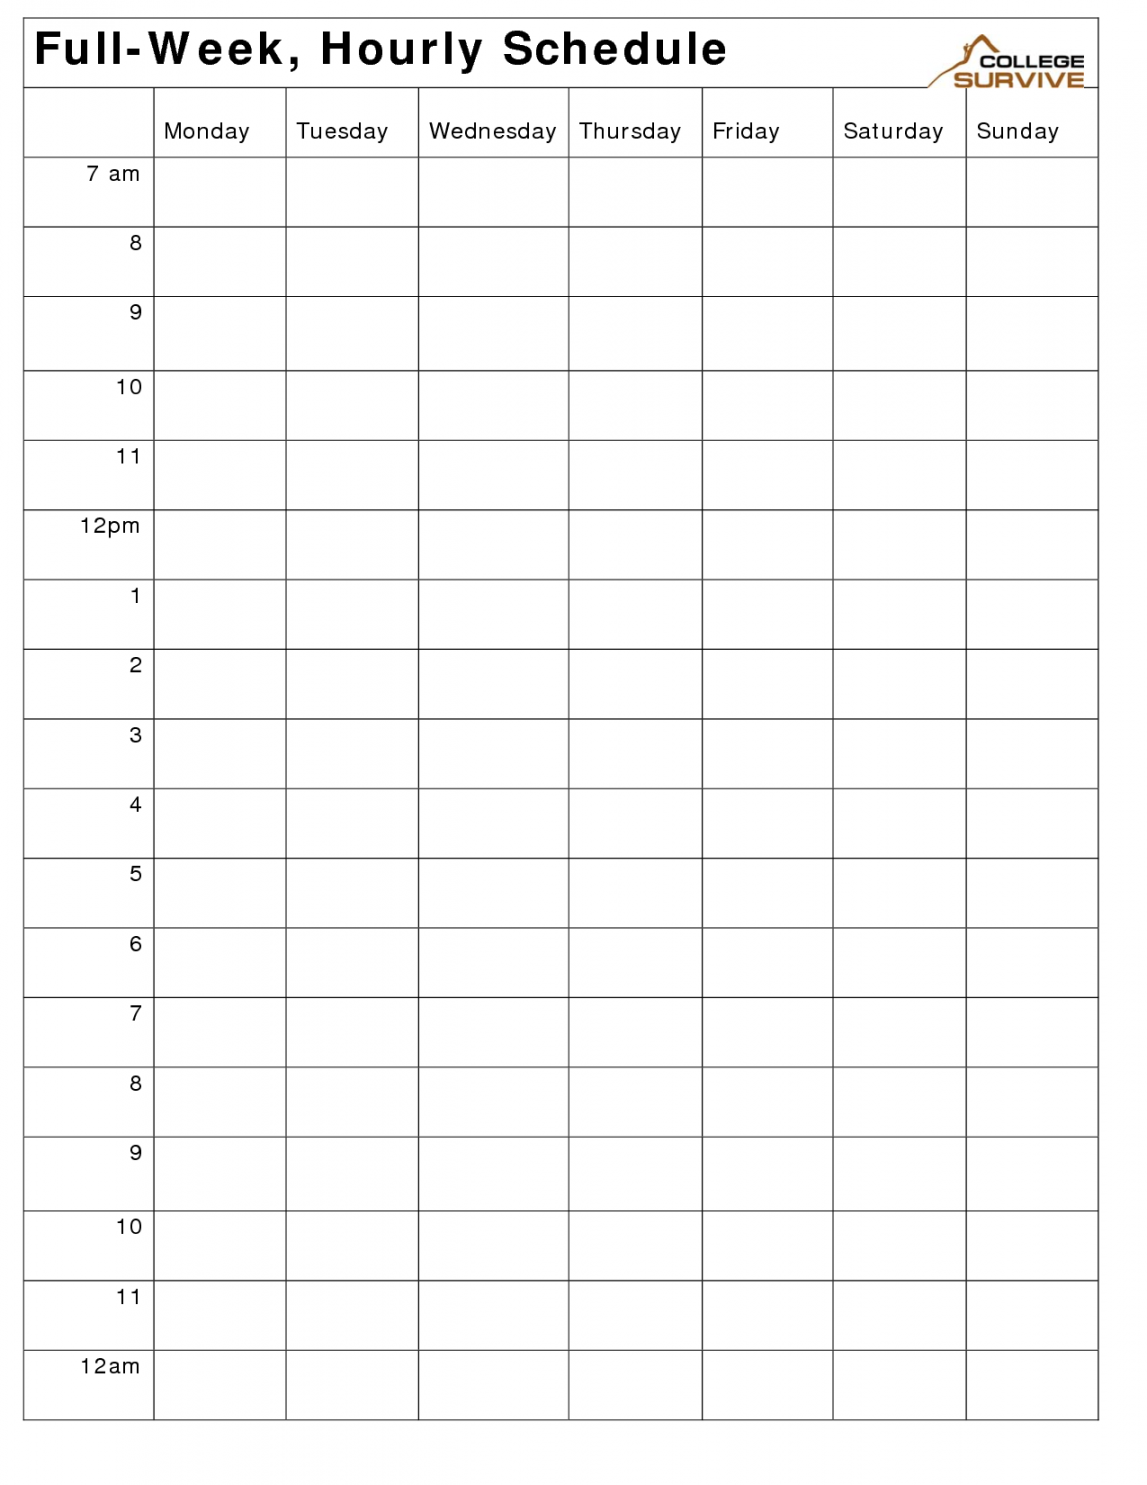 Printable Weekly Hourly Schedule Template   Daily calendar